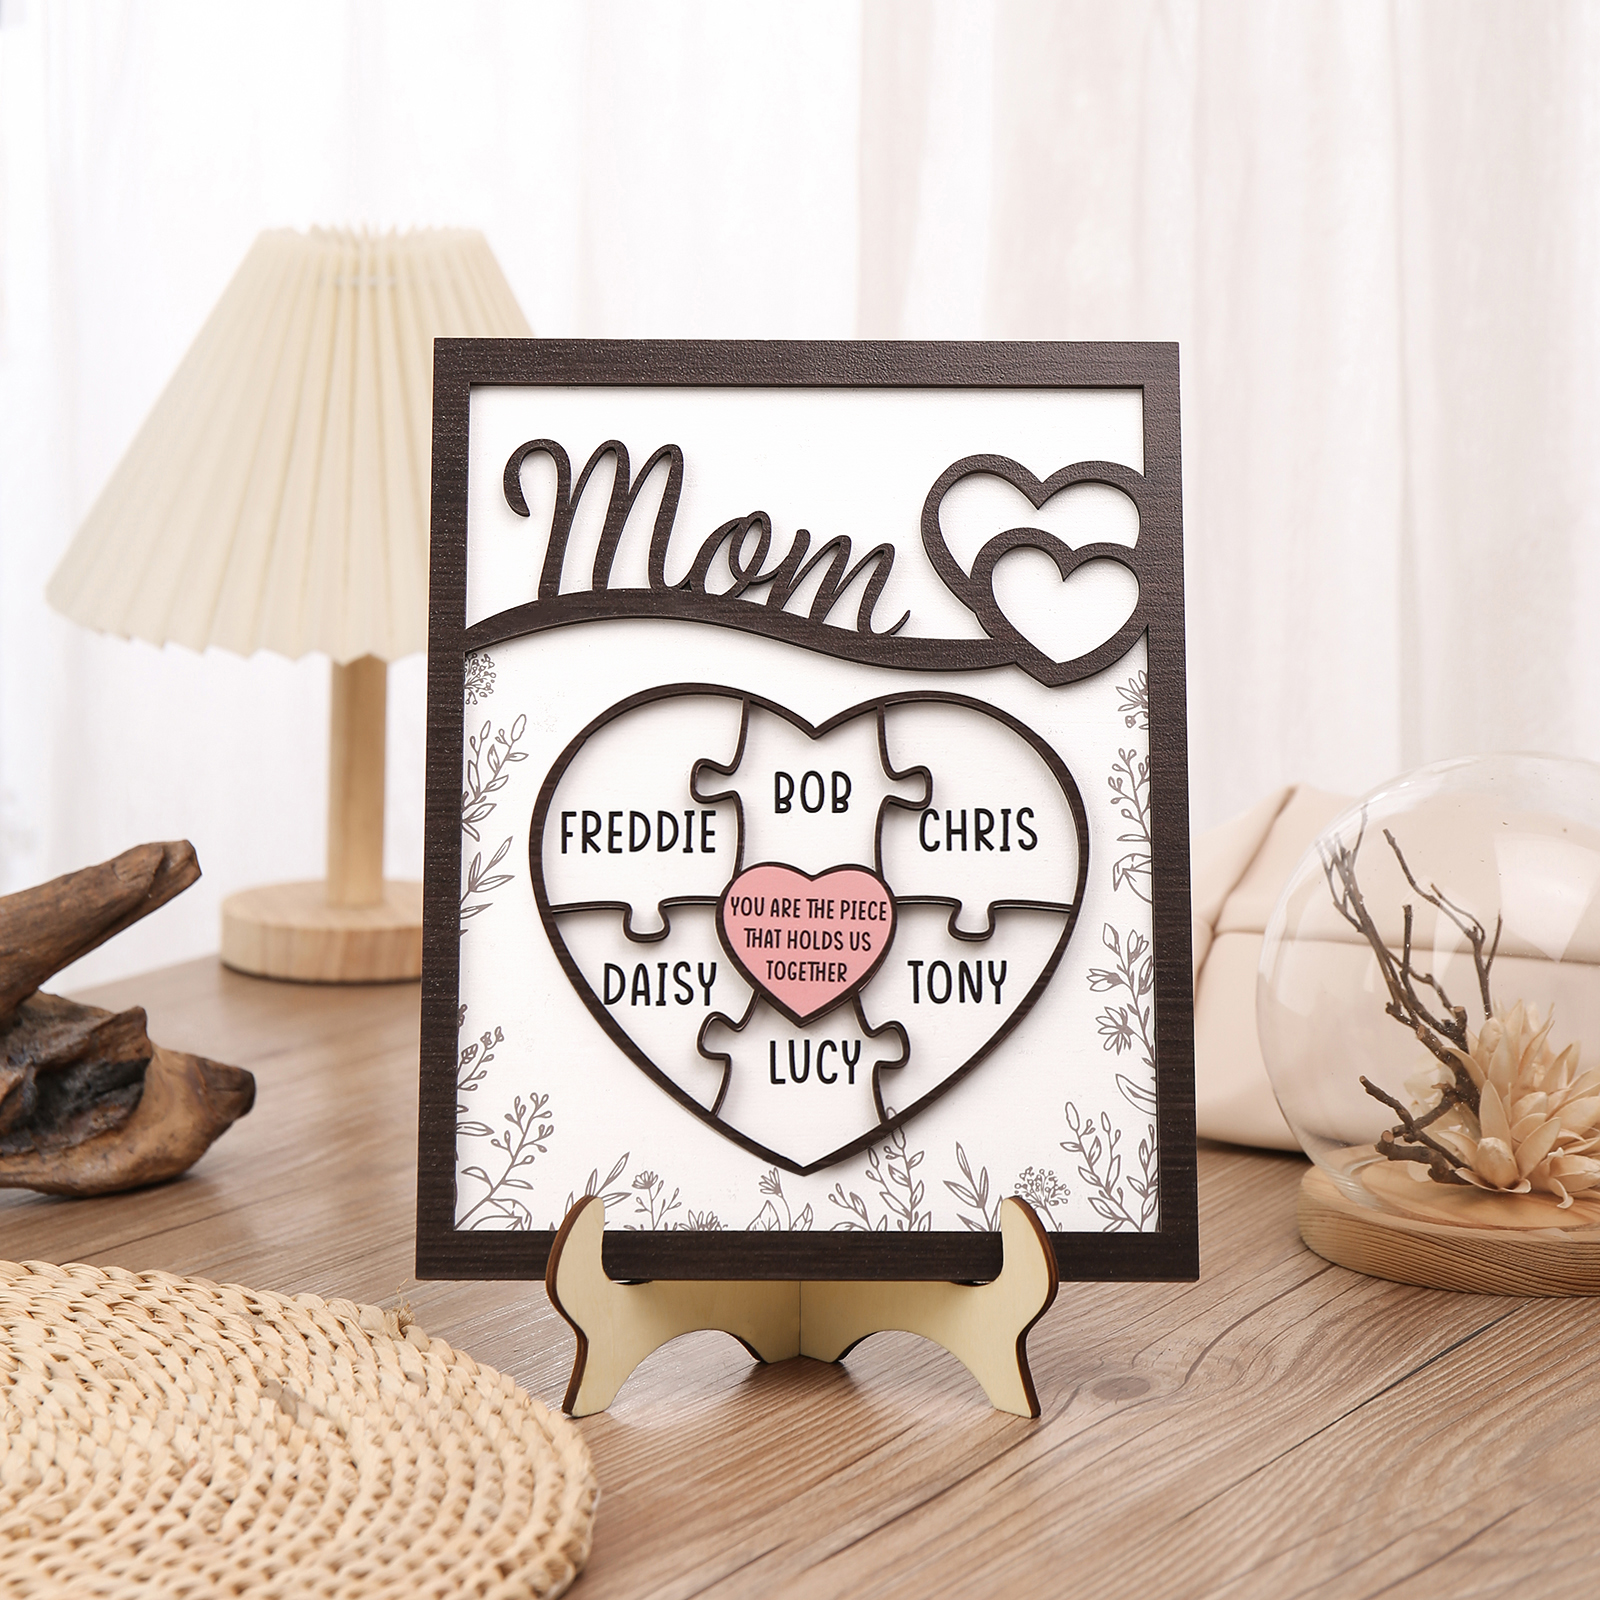 6 Names - Personalized Home Frame Wooden Decoration Customizable with 2 Texts, Love Pieces Wooden Board Painting for Mom